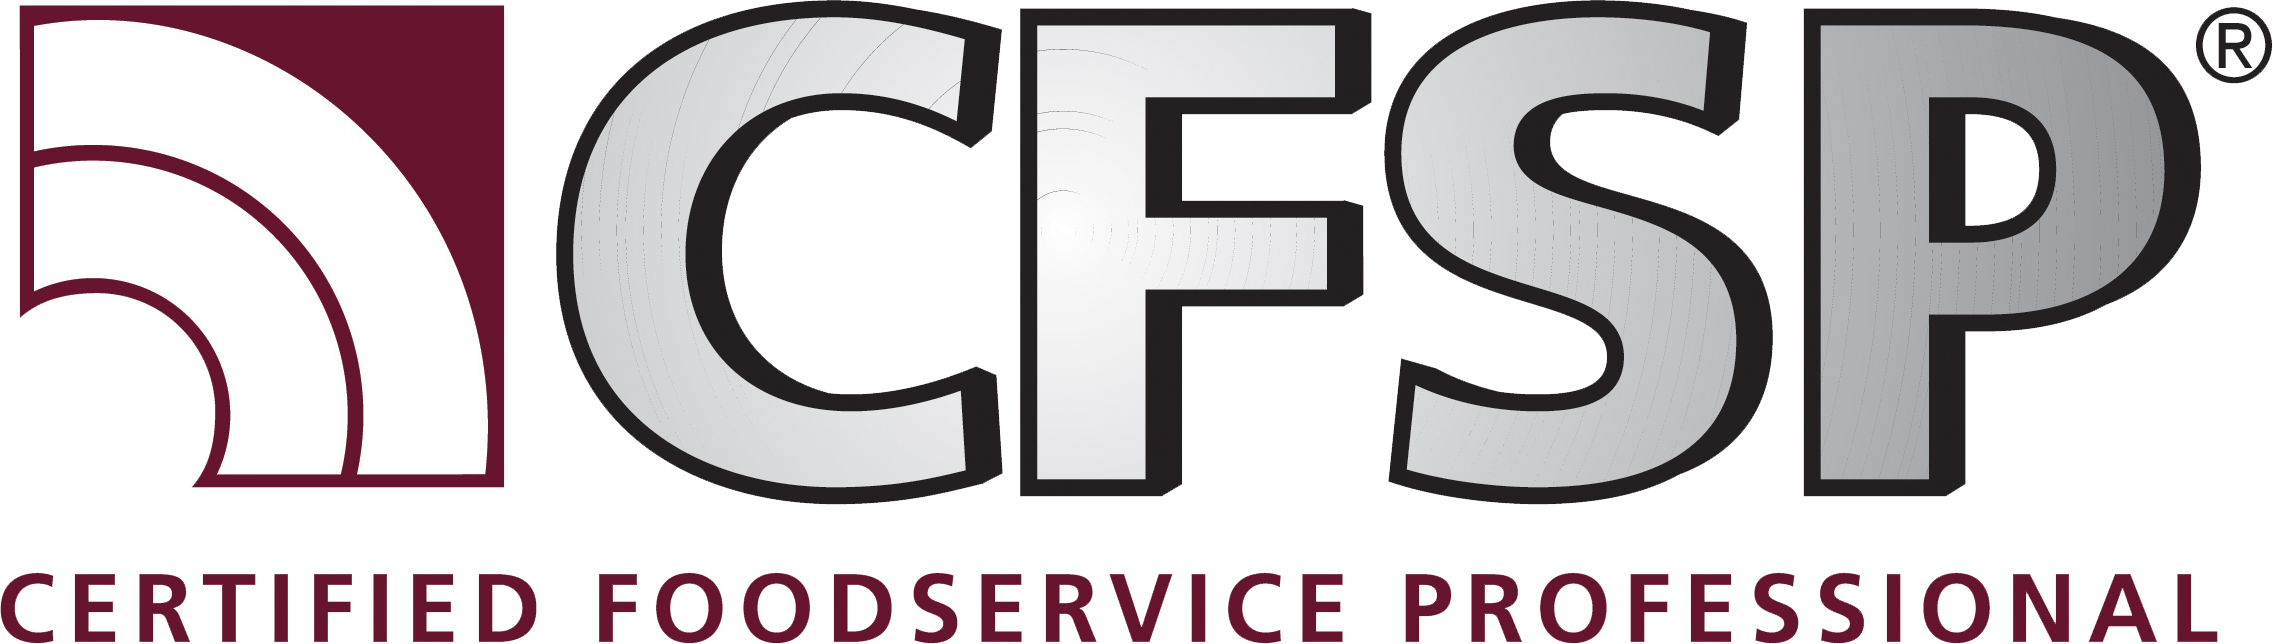 Become a Certified Food Service Professional with the FEA